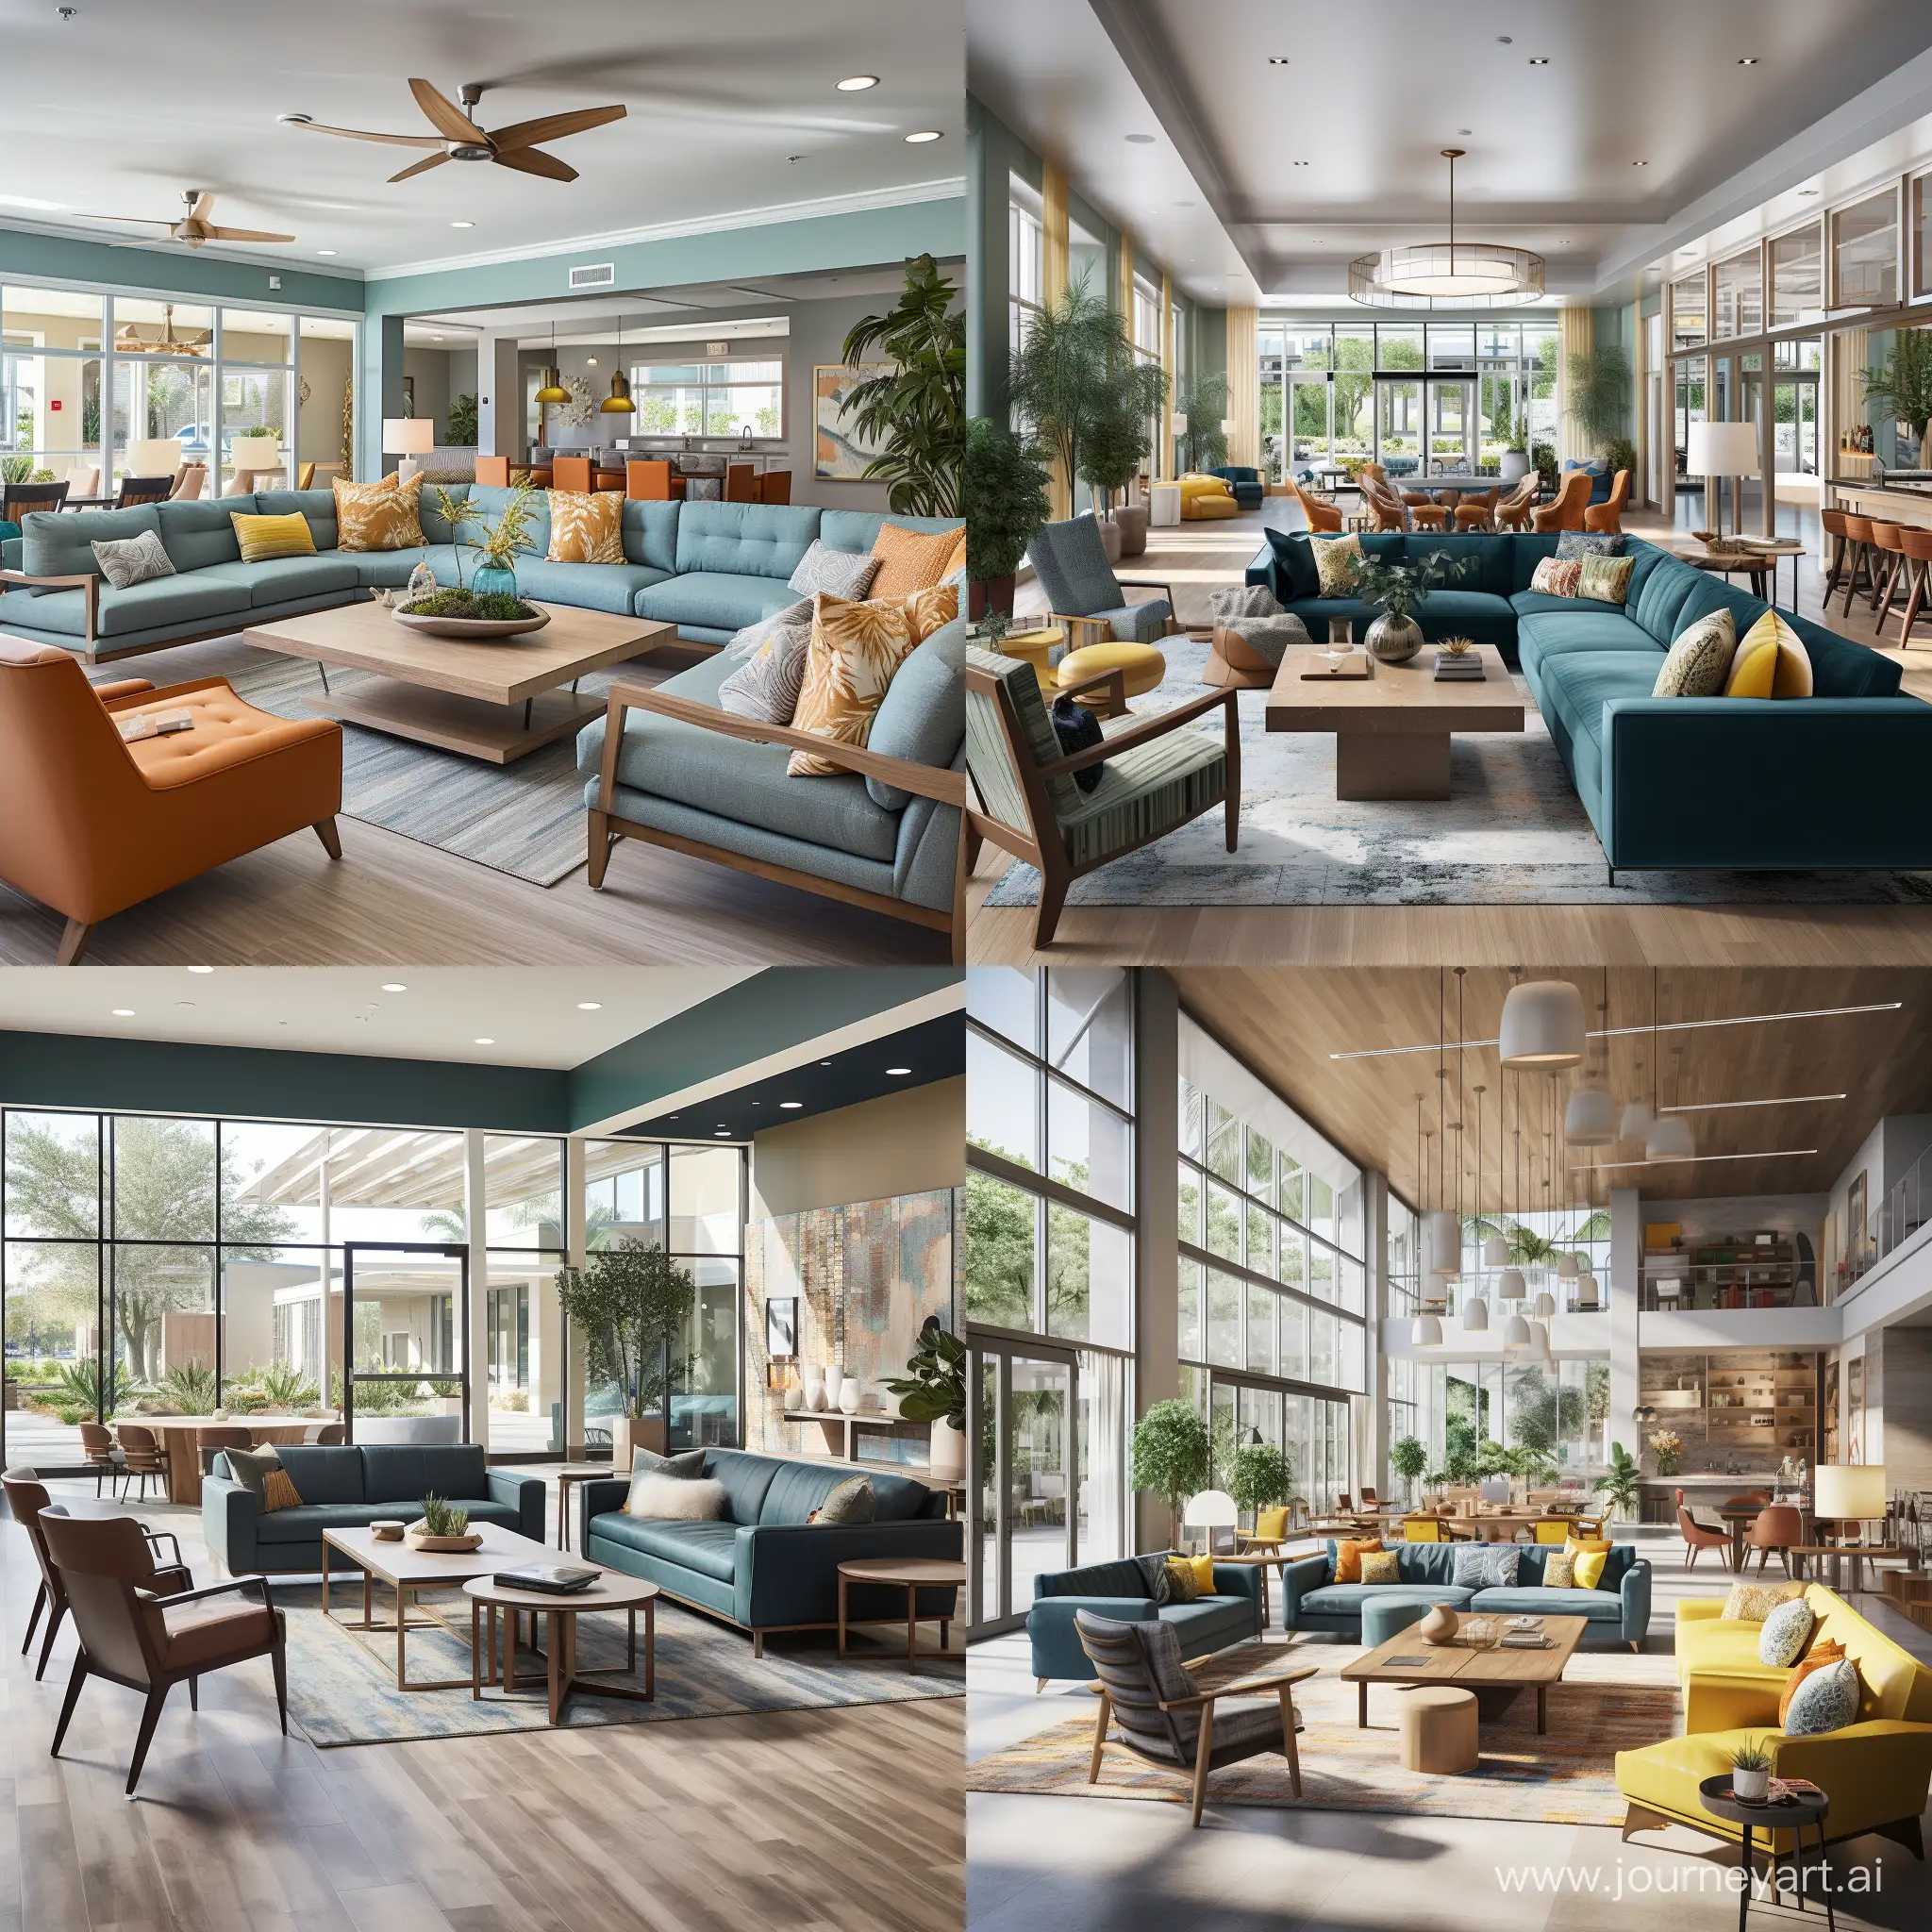 Community Living Rooms:

Design public spaces that mimic comfortable living rooms, equipped with seating, Wi-Fi, and amenities, encouraging people to gather, work, and socialize in a relaxed setting.